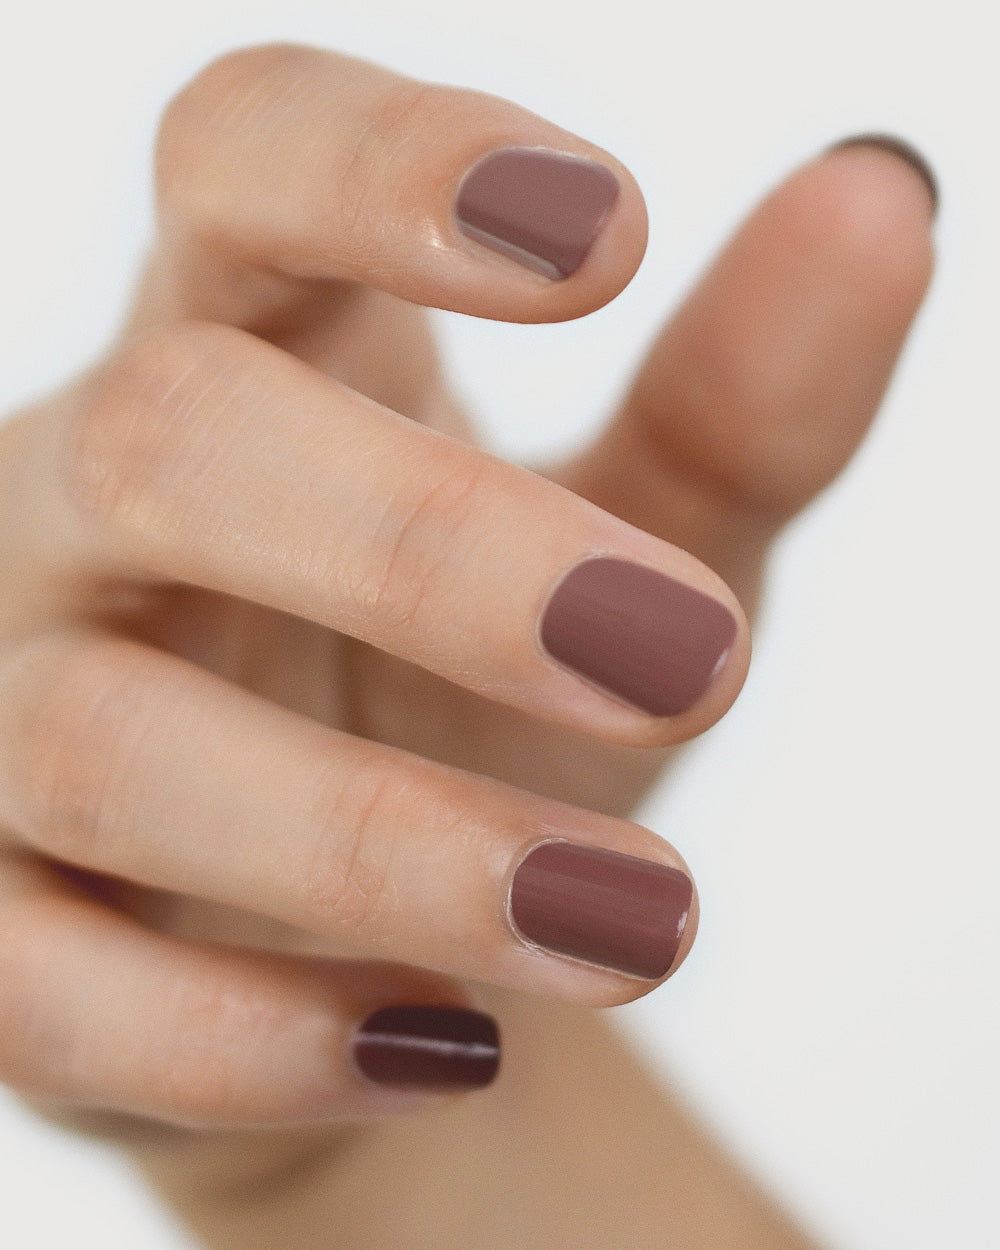 Fair skin hand wearing Grounded mylk chocolate crème nail polish by Sienna Byron Bay close-up